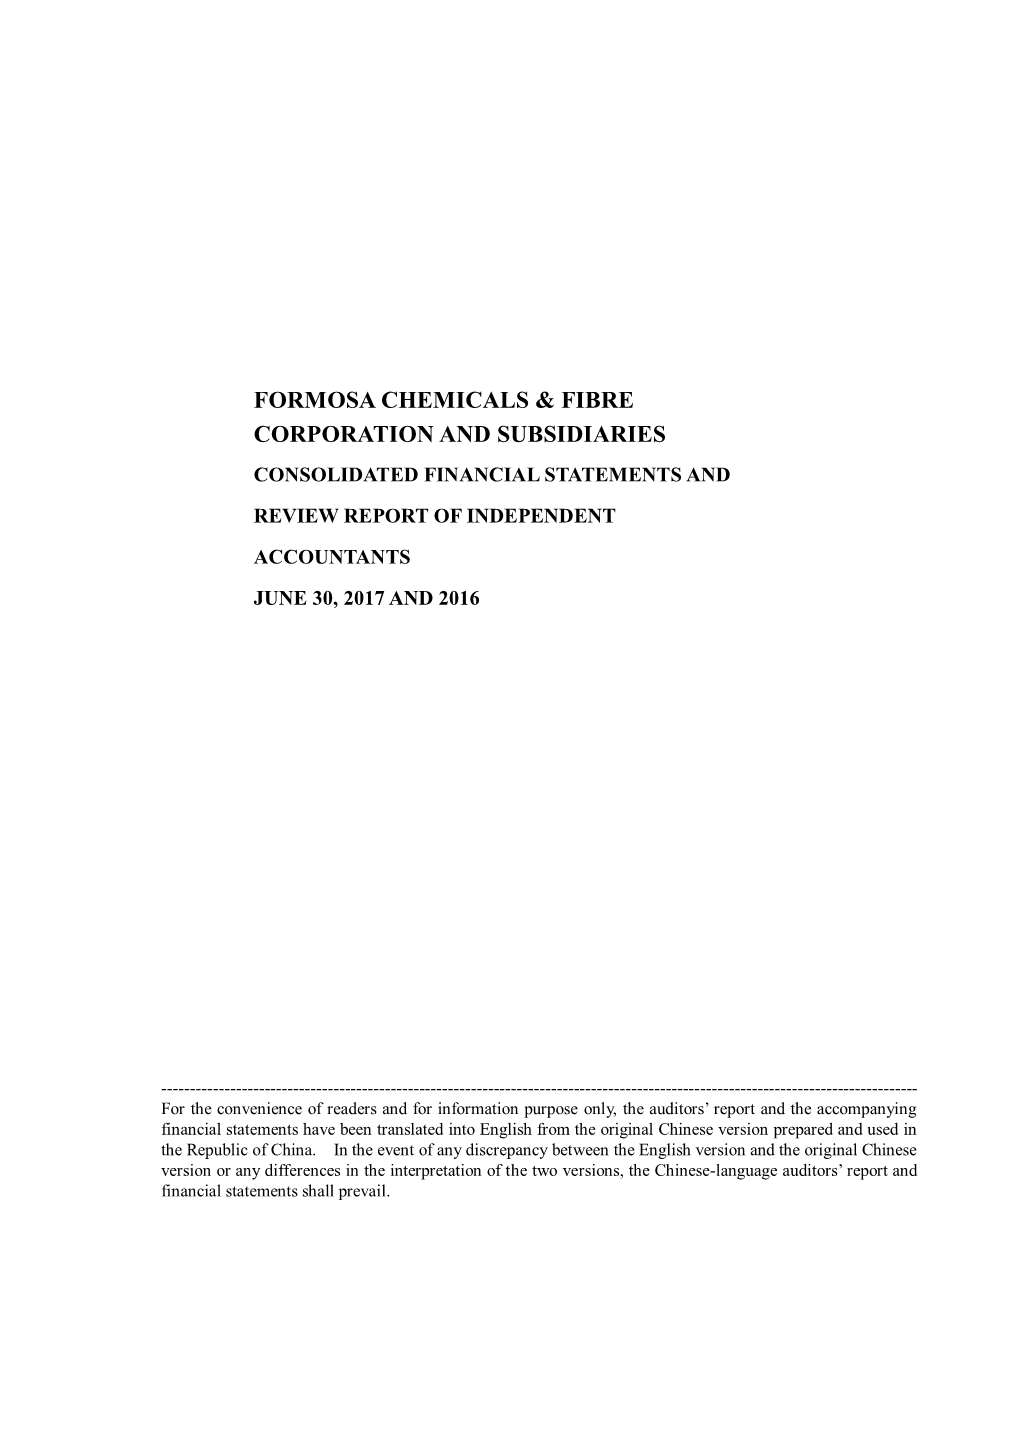 Formosa Chemicals & Fibre Corporation and Subsidiaries